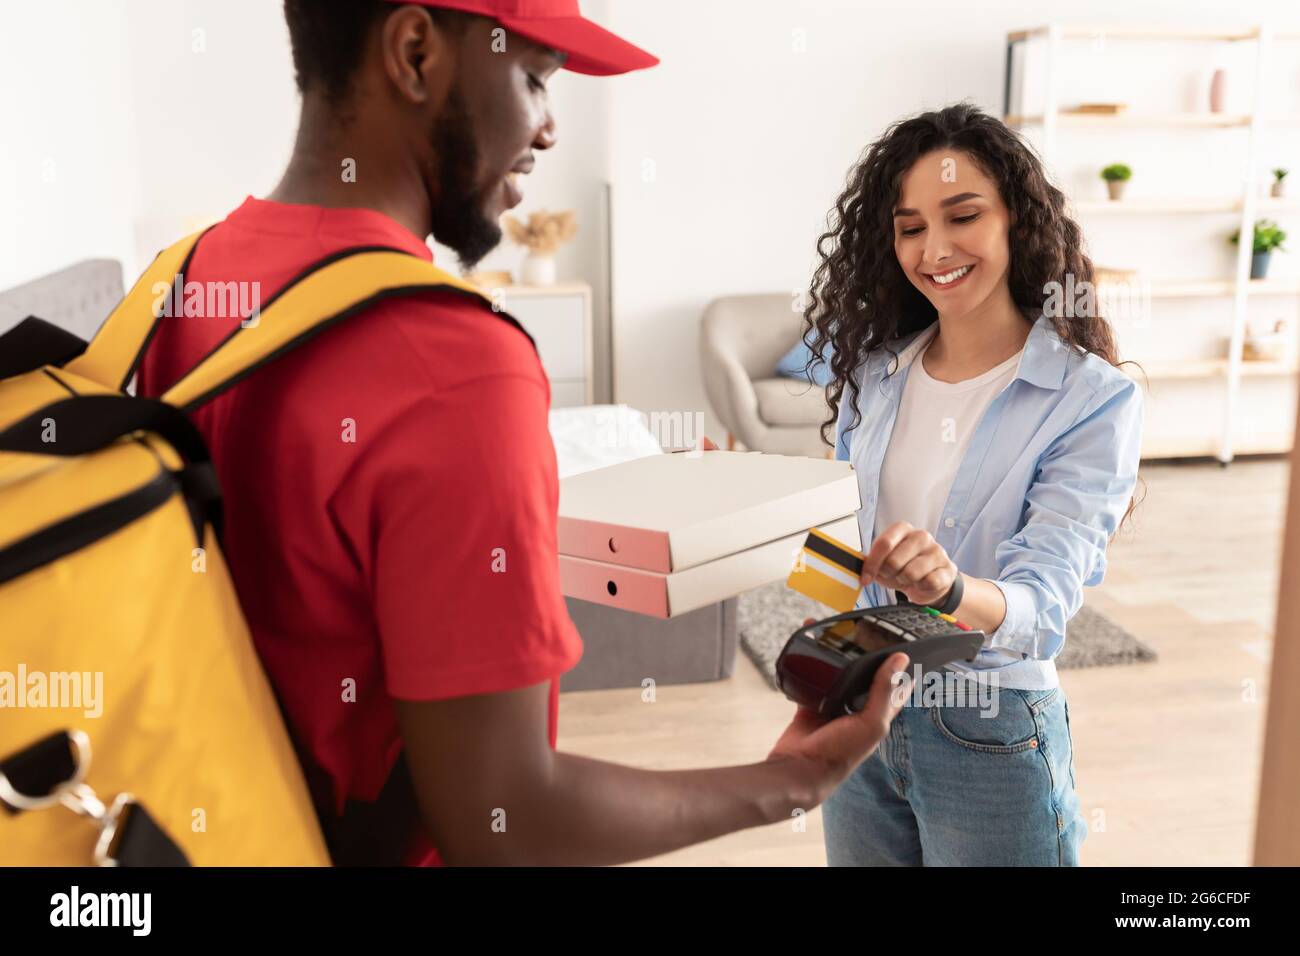 Smiling deliveryman holding POS machine, woman paying with card Stock Photo